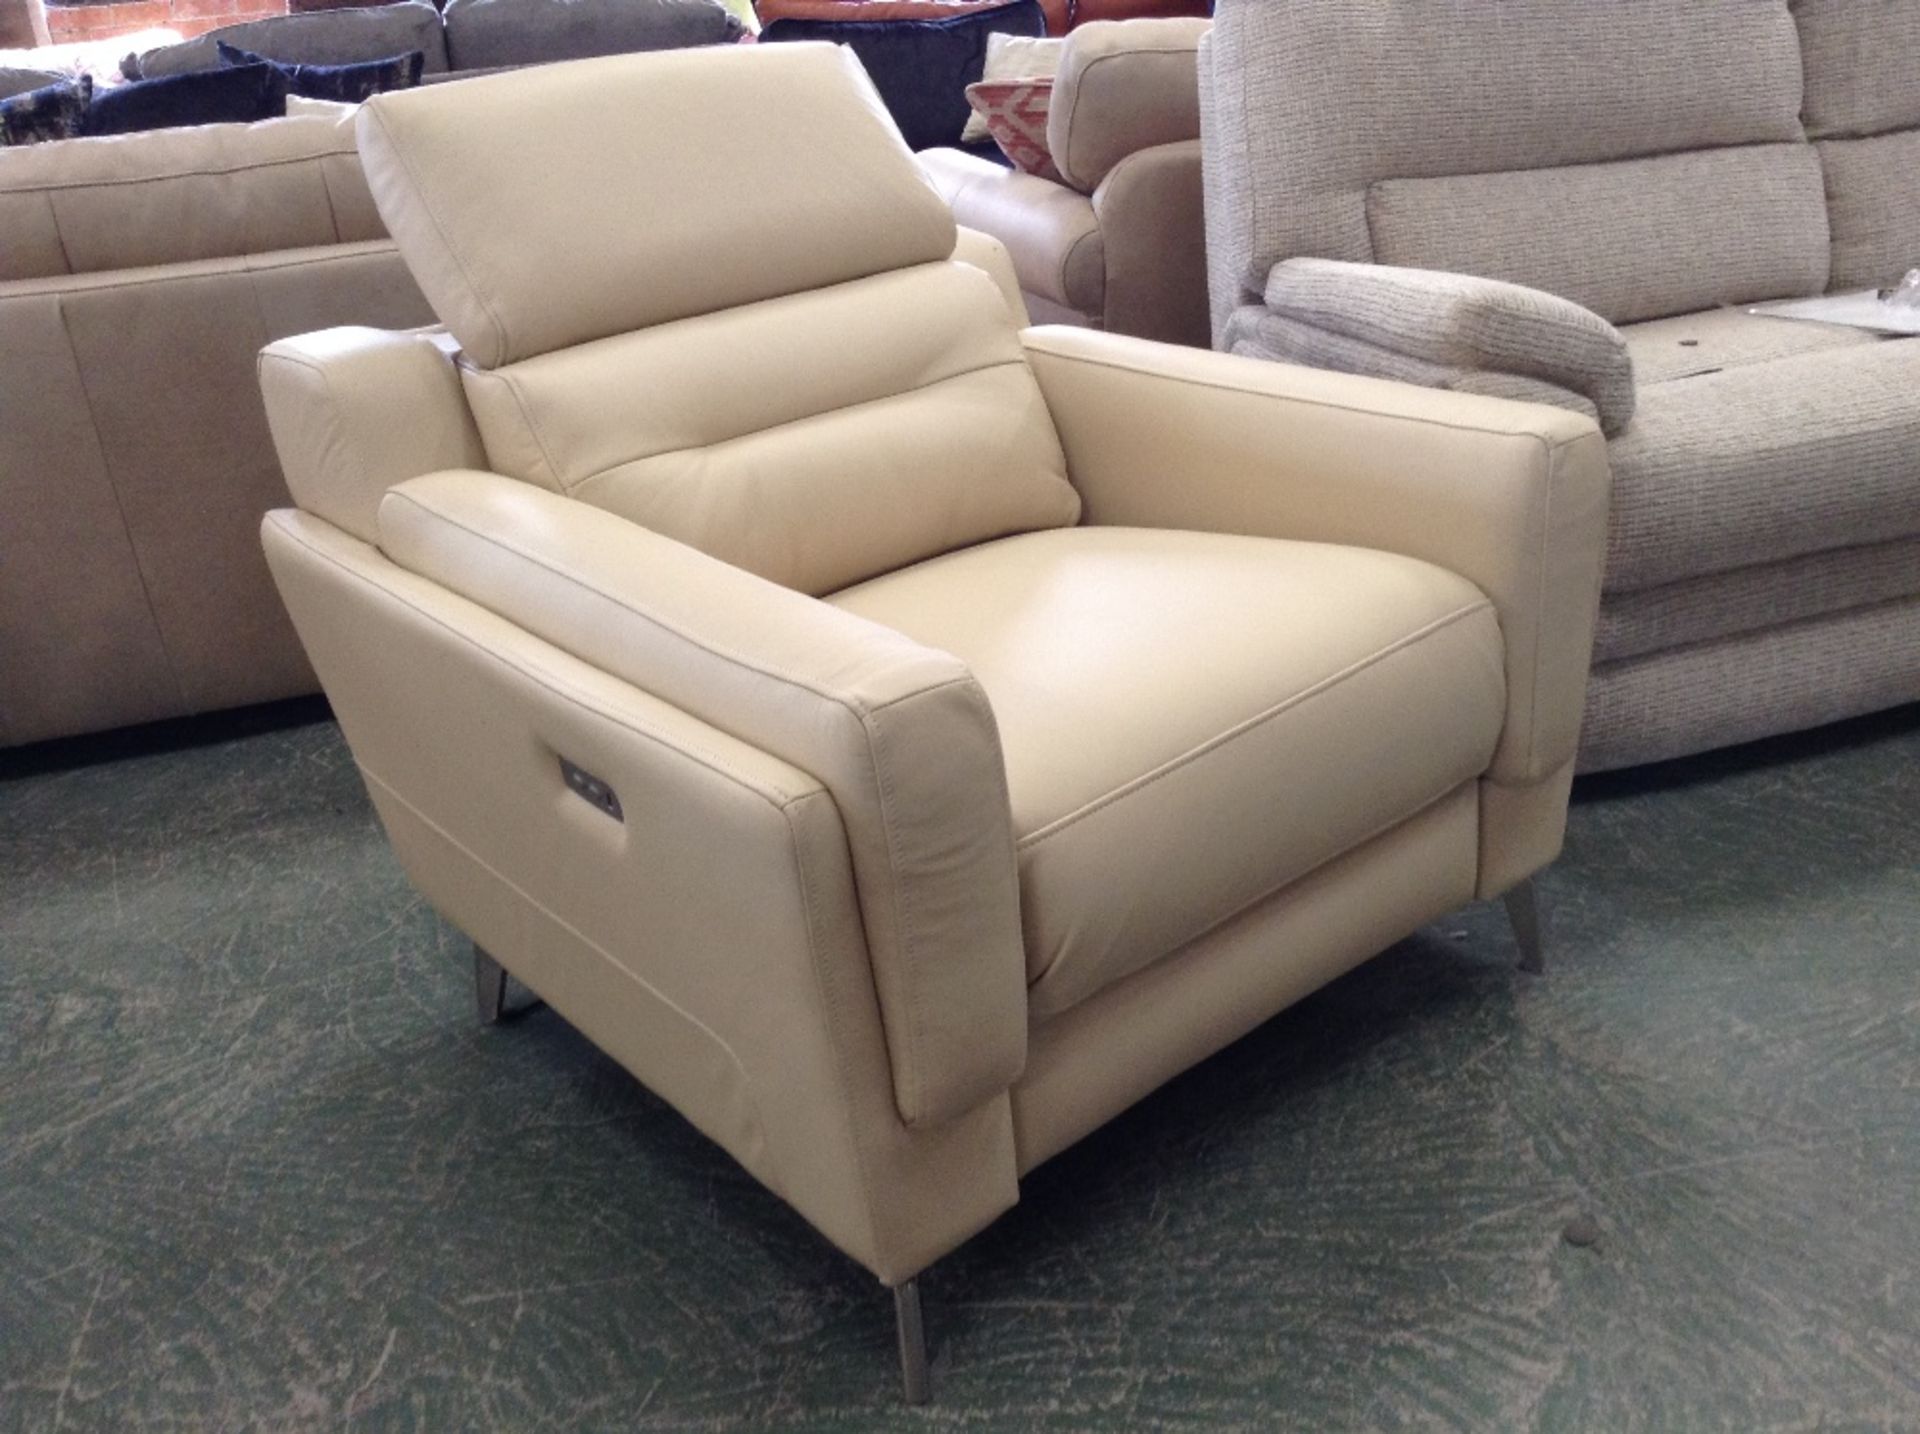 CREAM LEATHER ELECTRIC RECLINING CHAIR WITH ADJUST